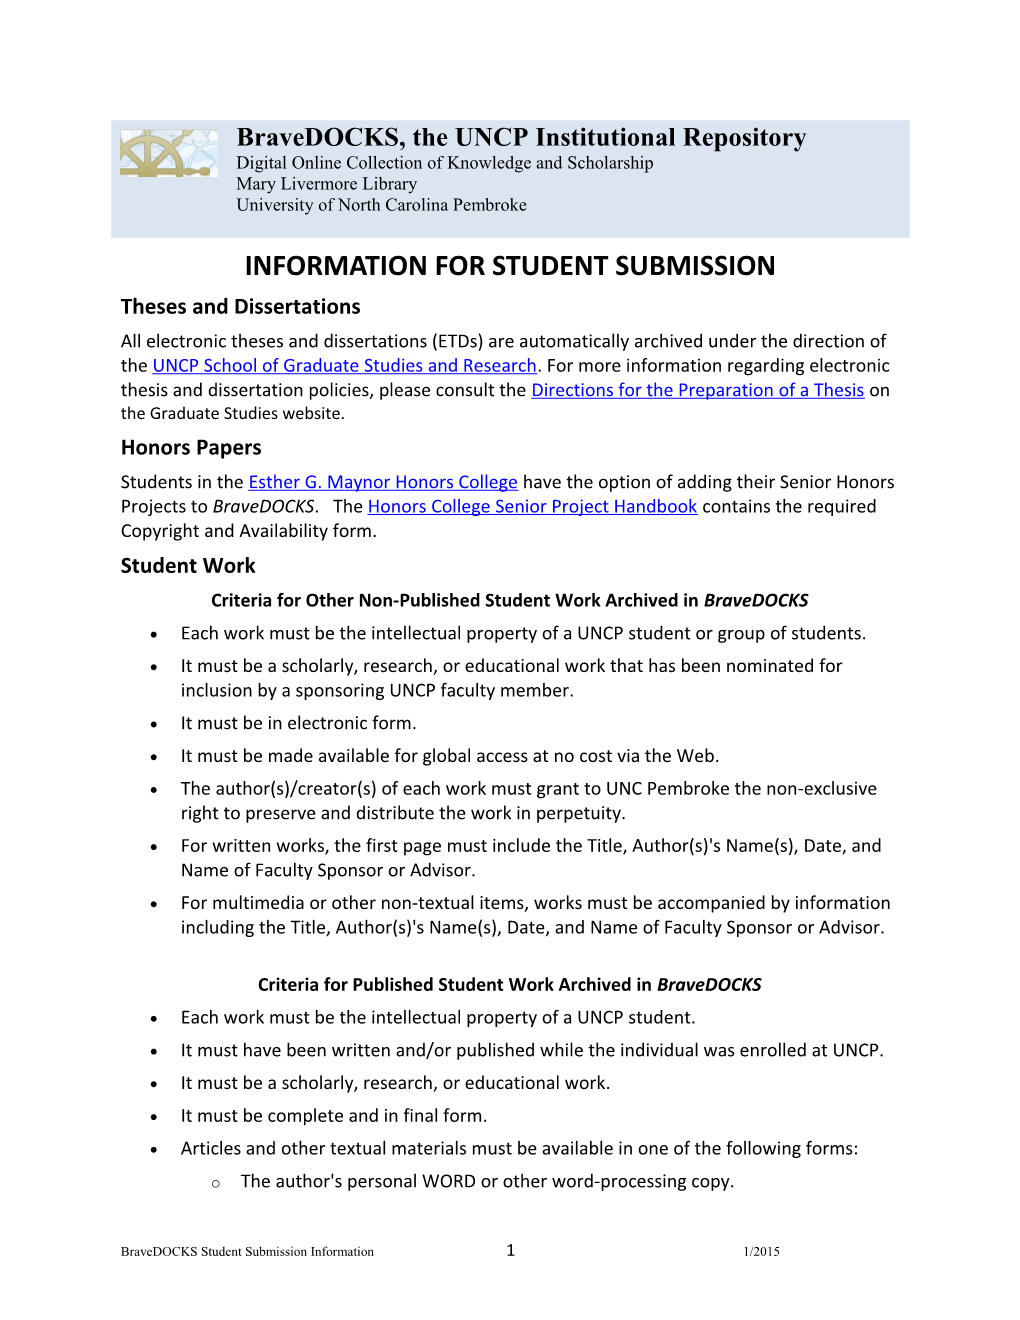 Information for Student Submission